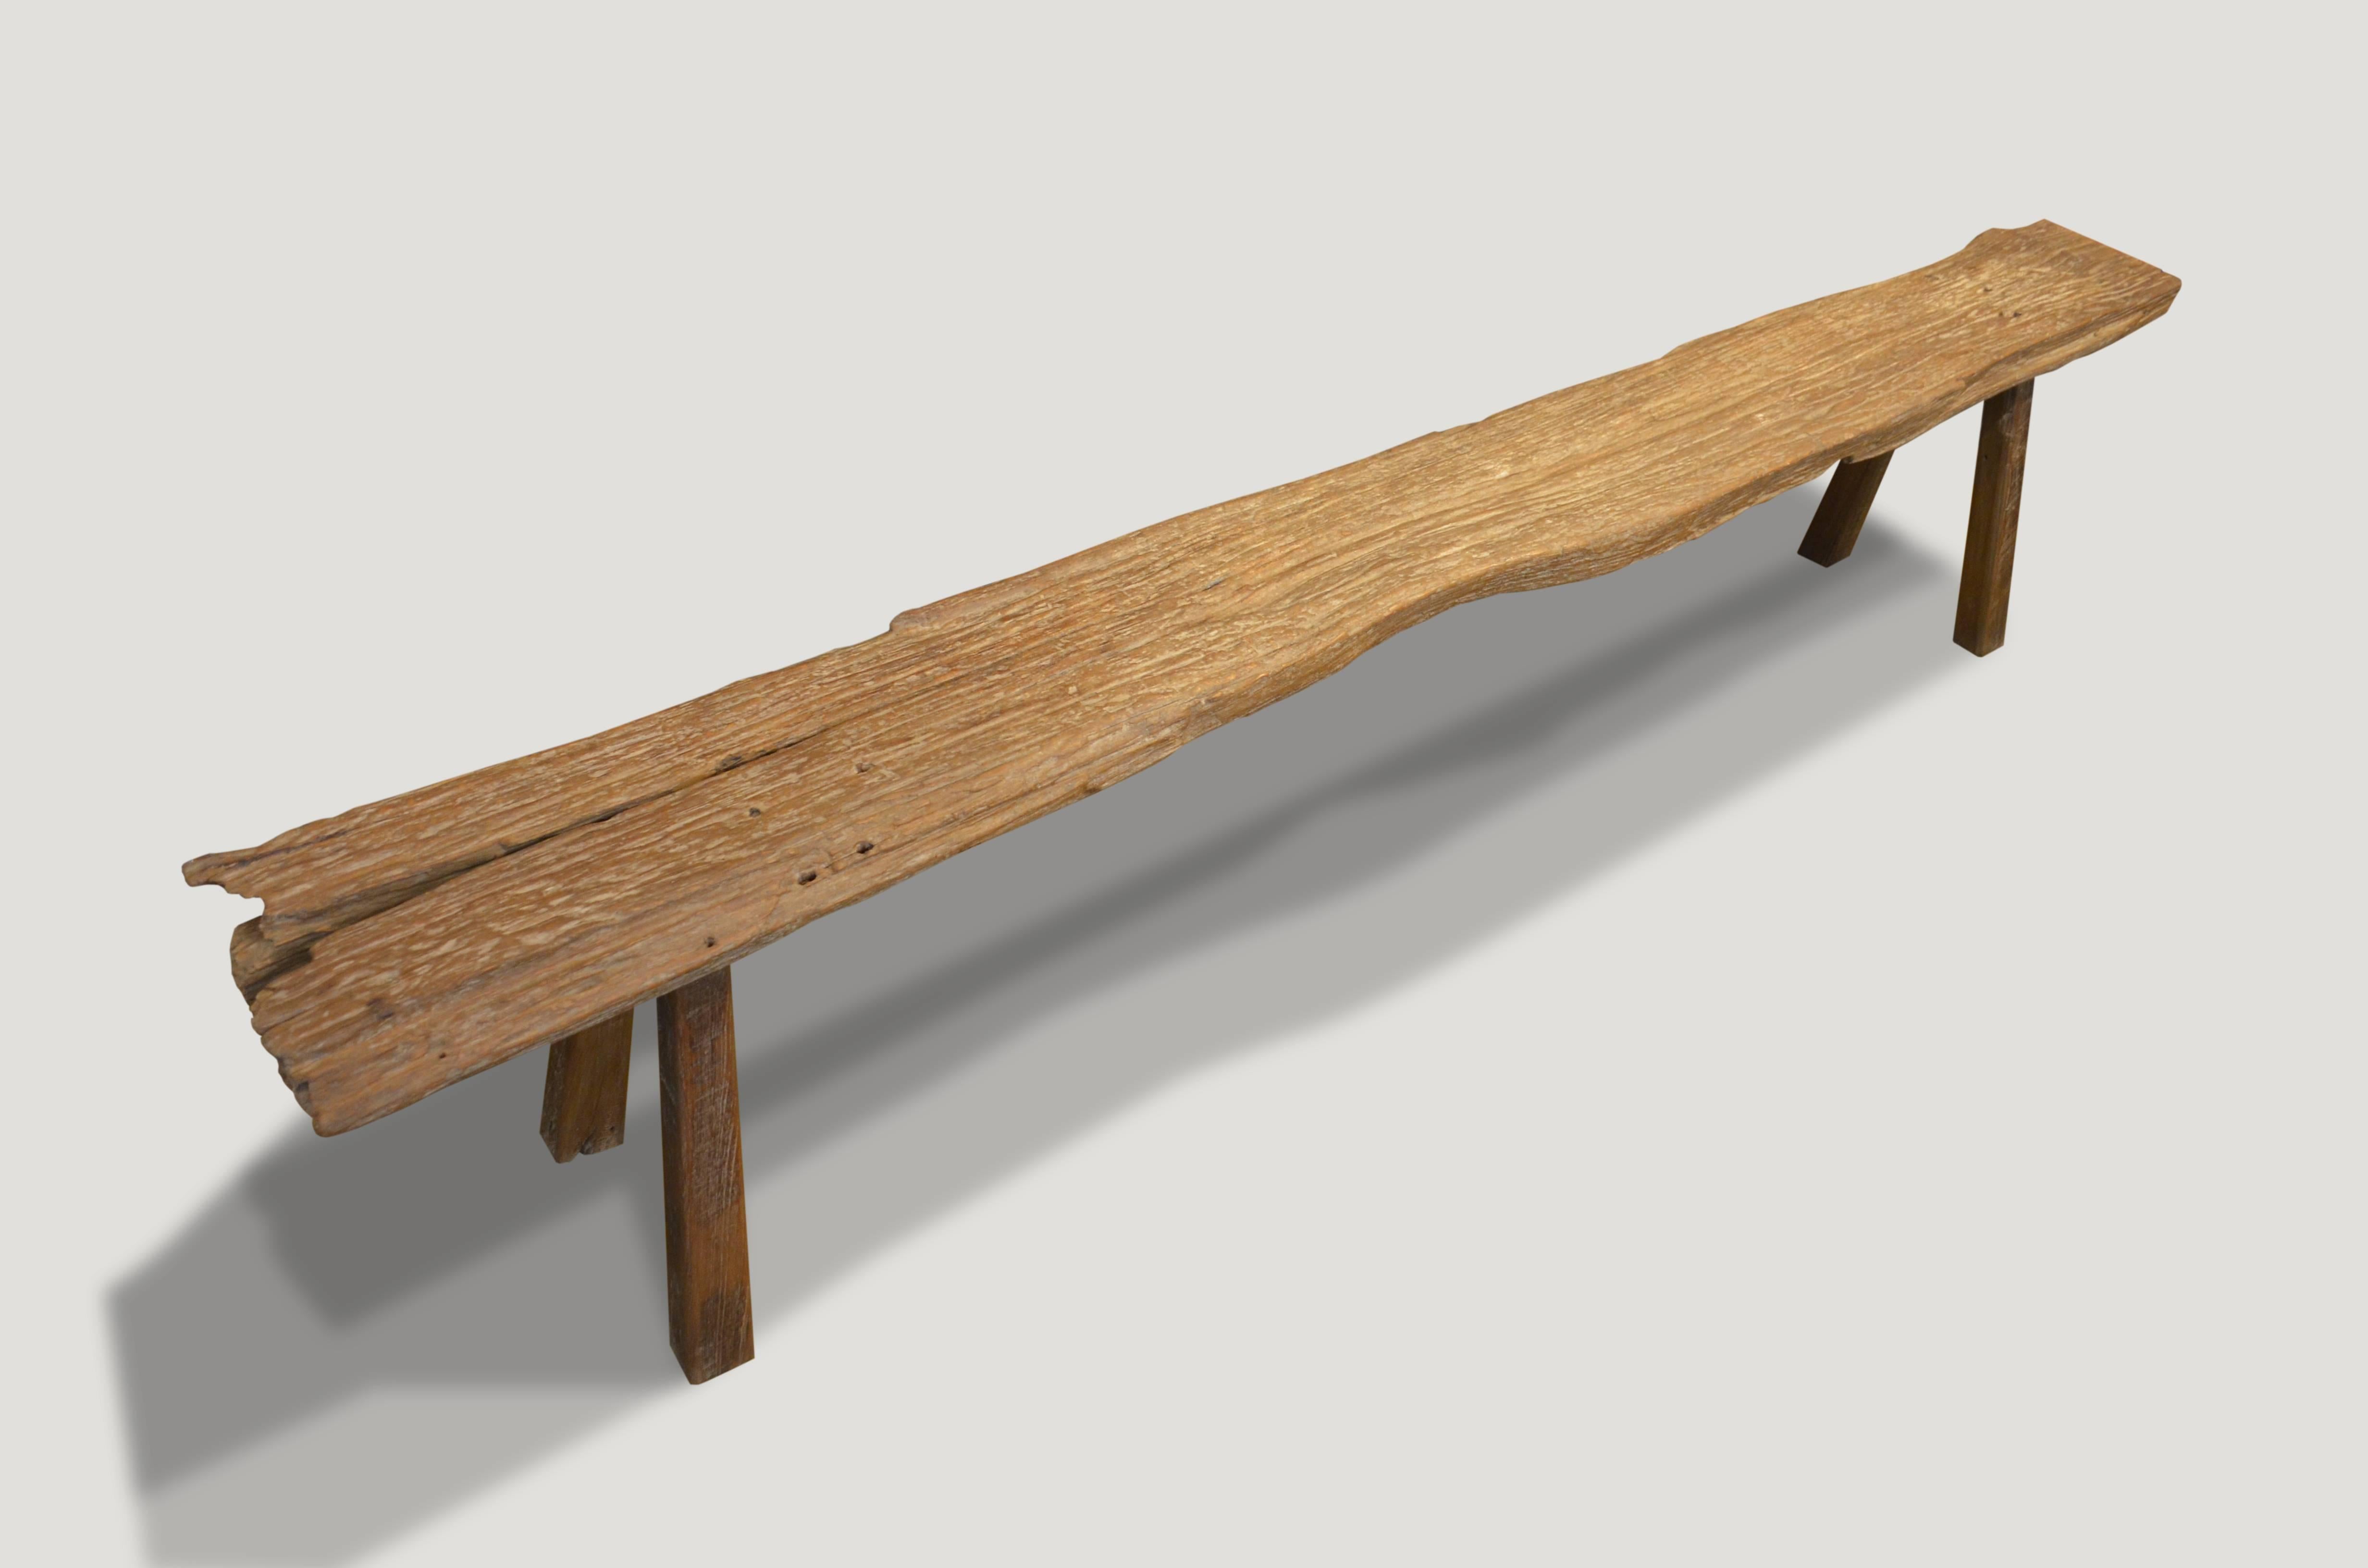 Antique, single slab teak wood bench or shelf with beautiful natural eroded ends.

This bench or shelf was sourced in the spirit of wabi-sabi, a Japanese philosophy that beauty can be found in imperfection and impermanence. It’s a beauty of things